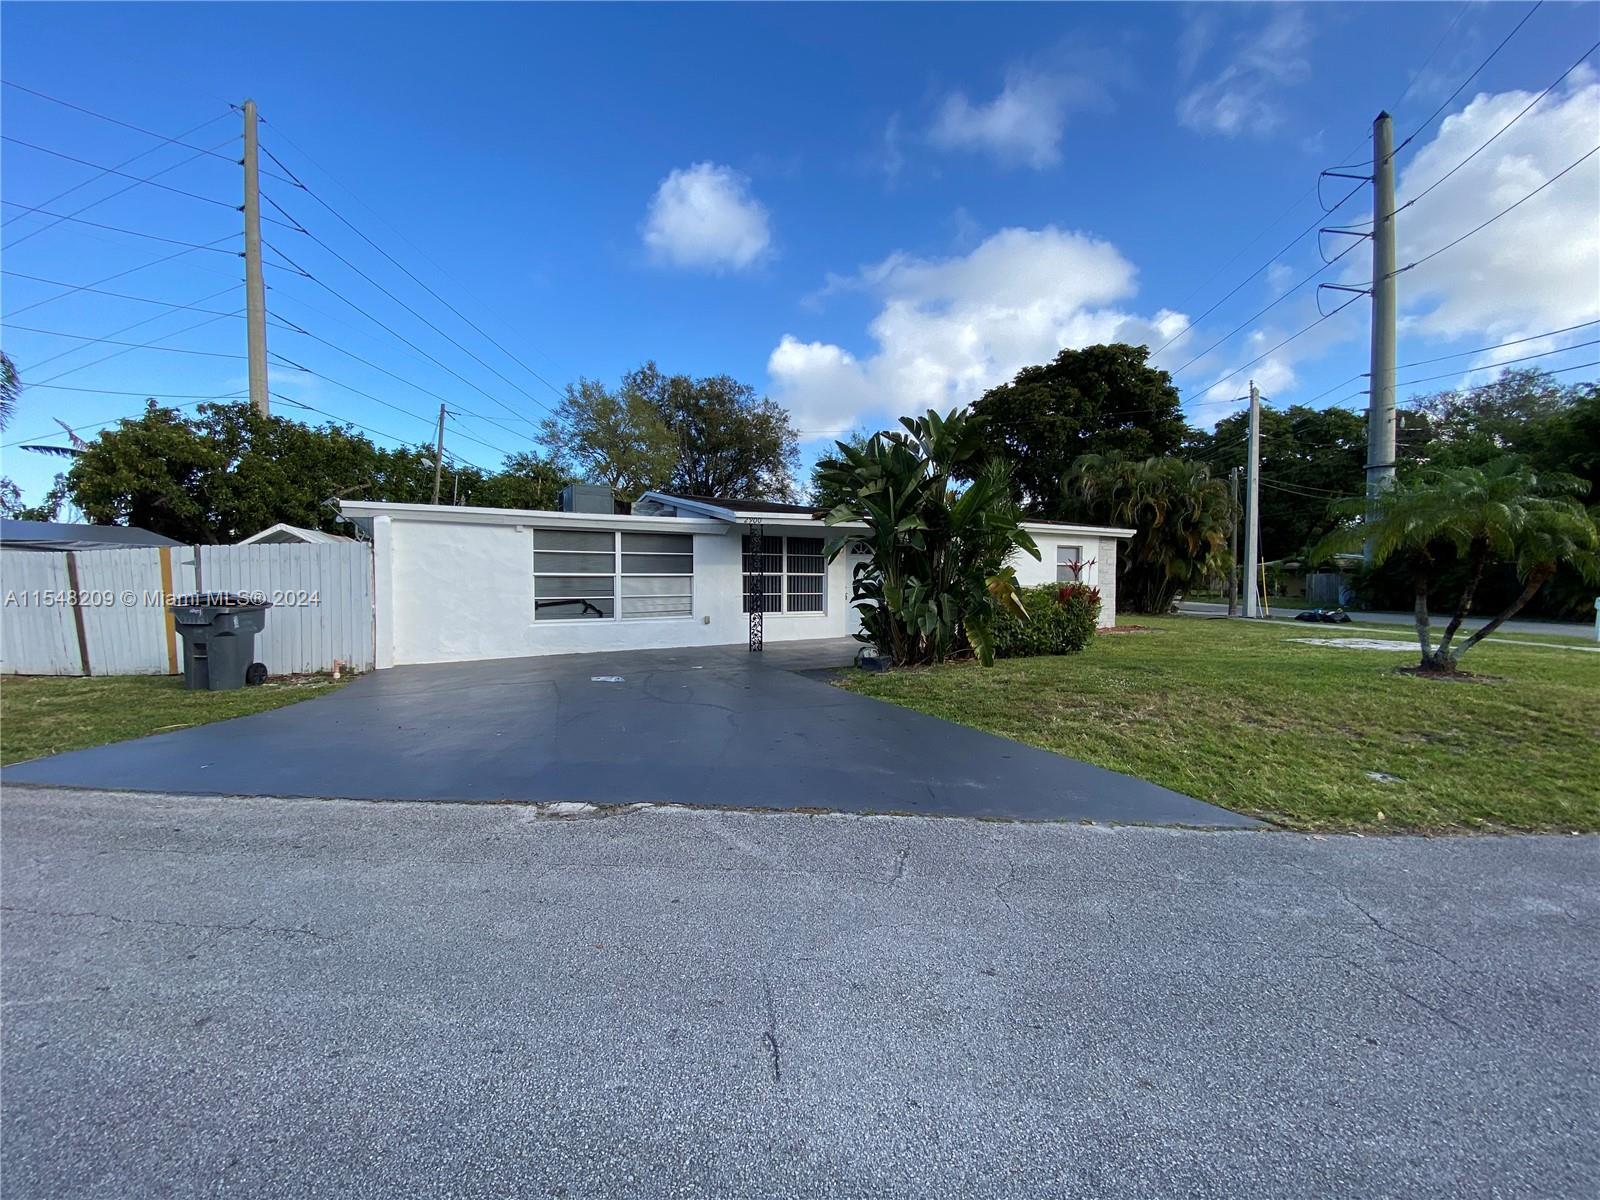 Photo of 2900 N 58th Ave in Hollywood, FL